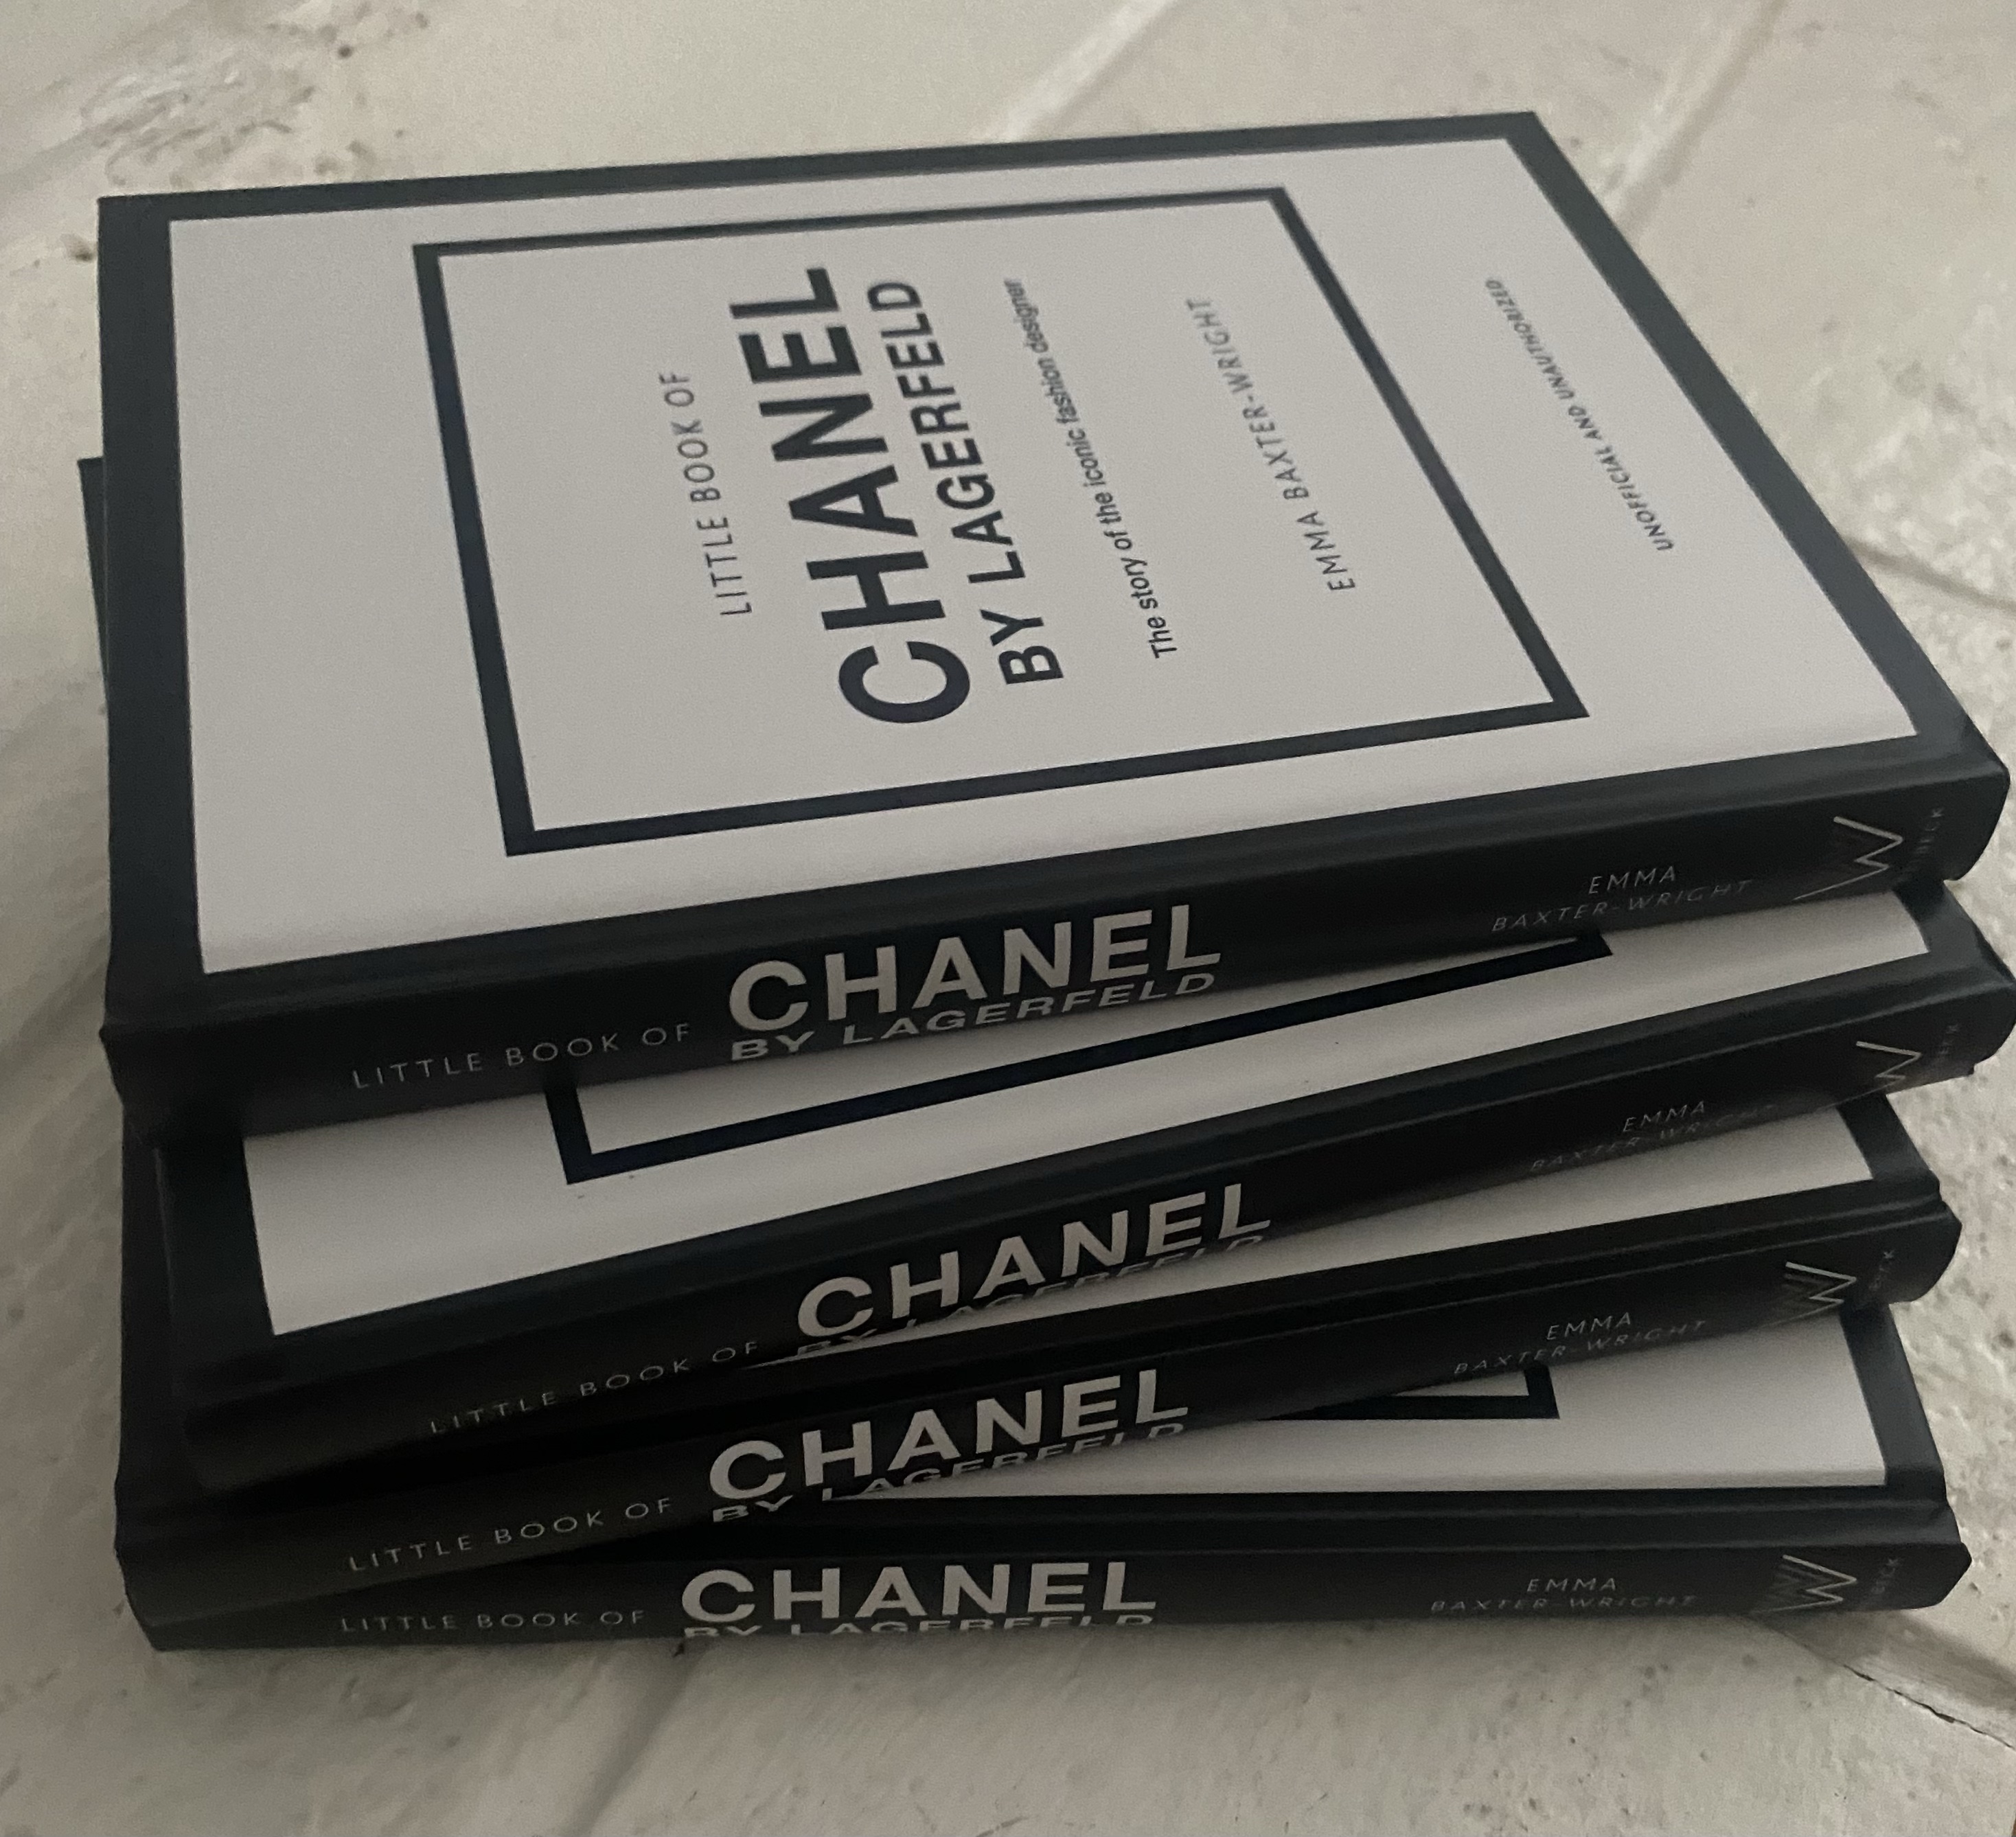 Little Book of CHANEL in Luxe Leather by Graphic Image  Picture Frames  Photo Albums Personalized and Engraved Digital Photo Gifts  SendAFrame